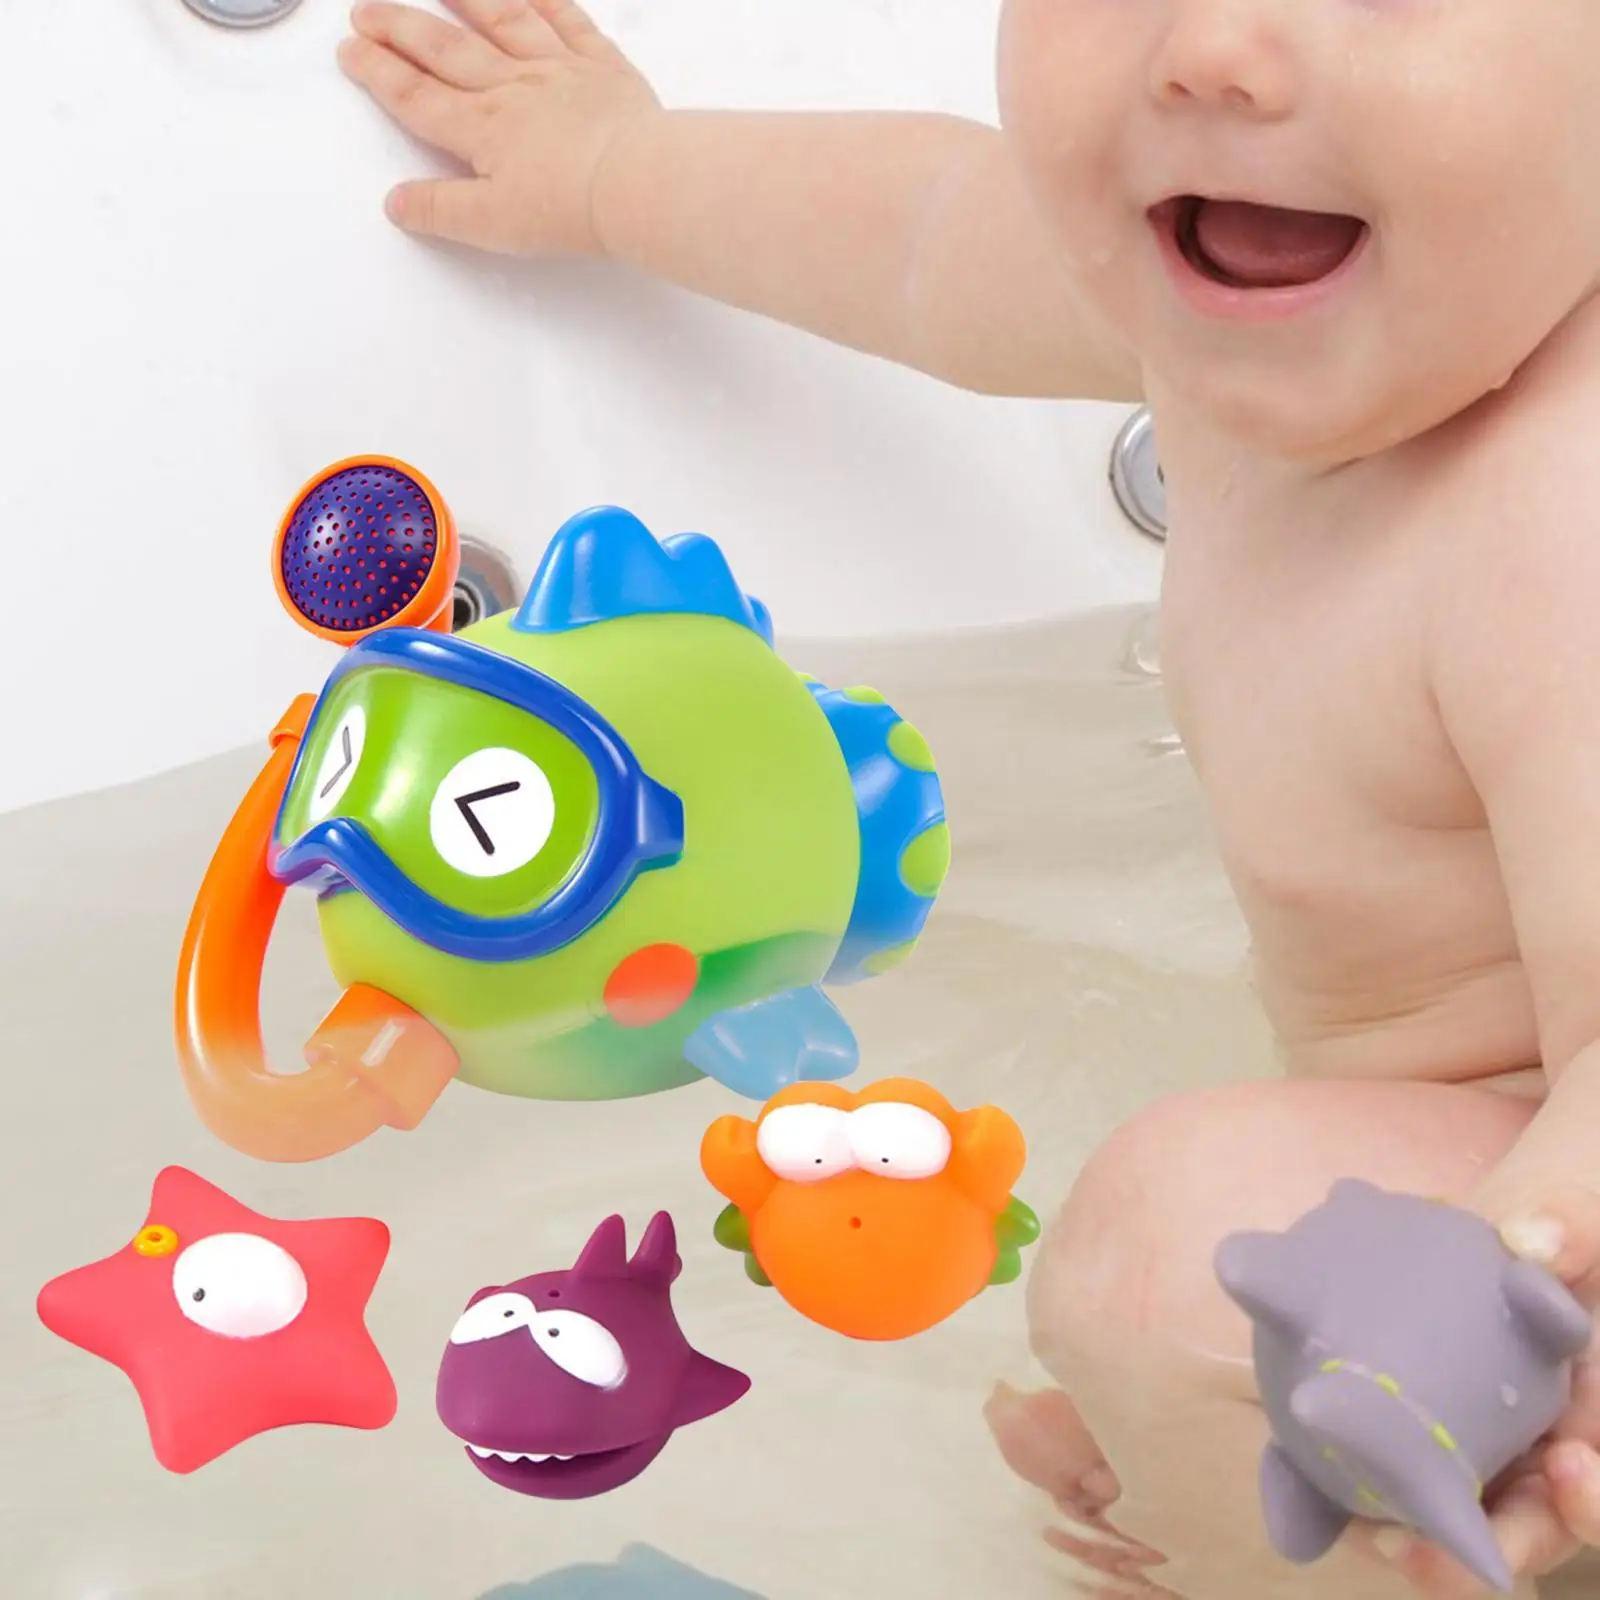 4Pcs Ocean Sea Animal Bathtub Toys Toddlers Bath Shower Toys Water Game for Toddlers Kids Girls Boys Infants Birthday Gifts